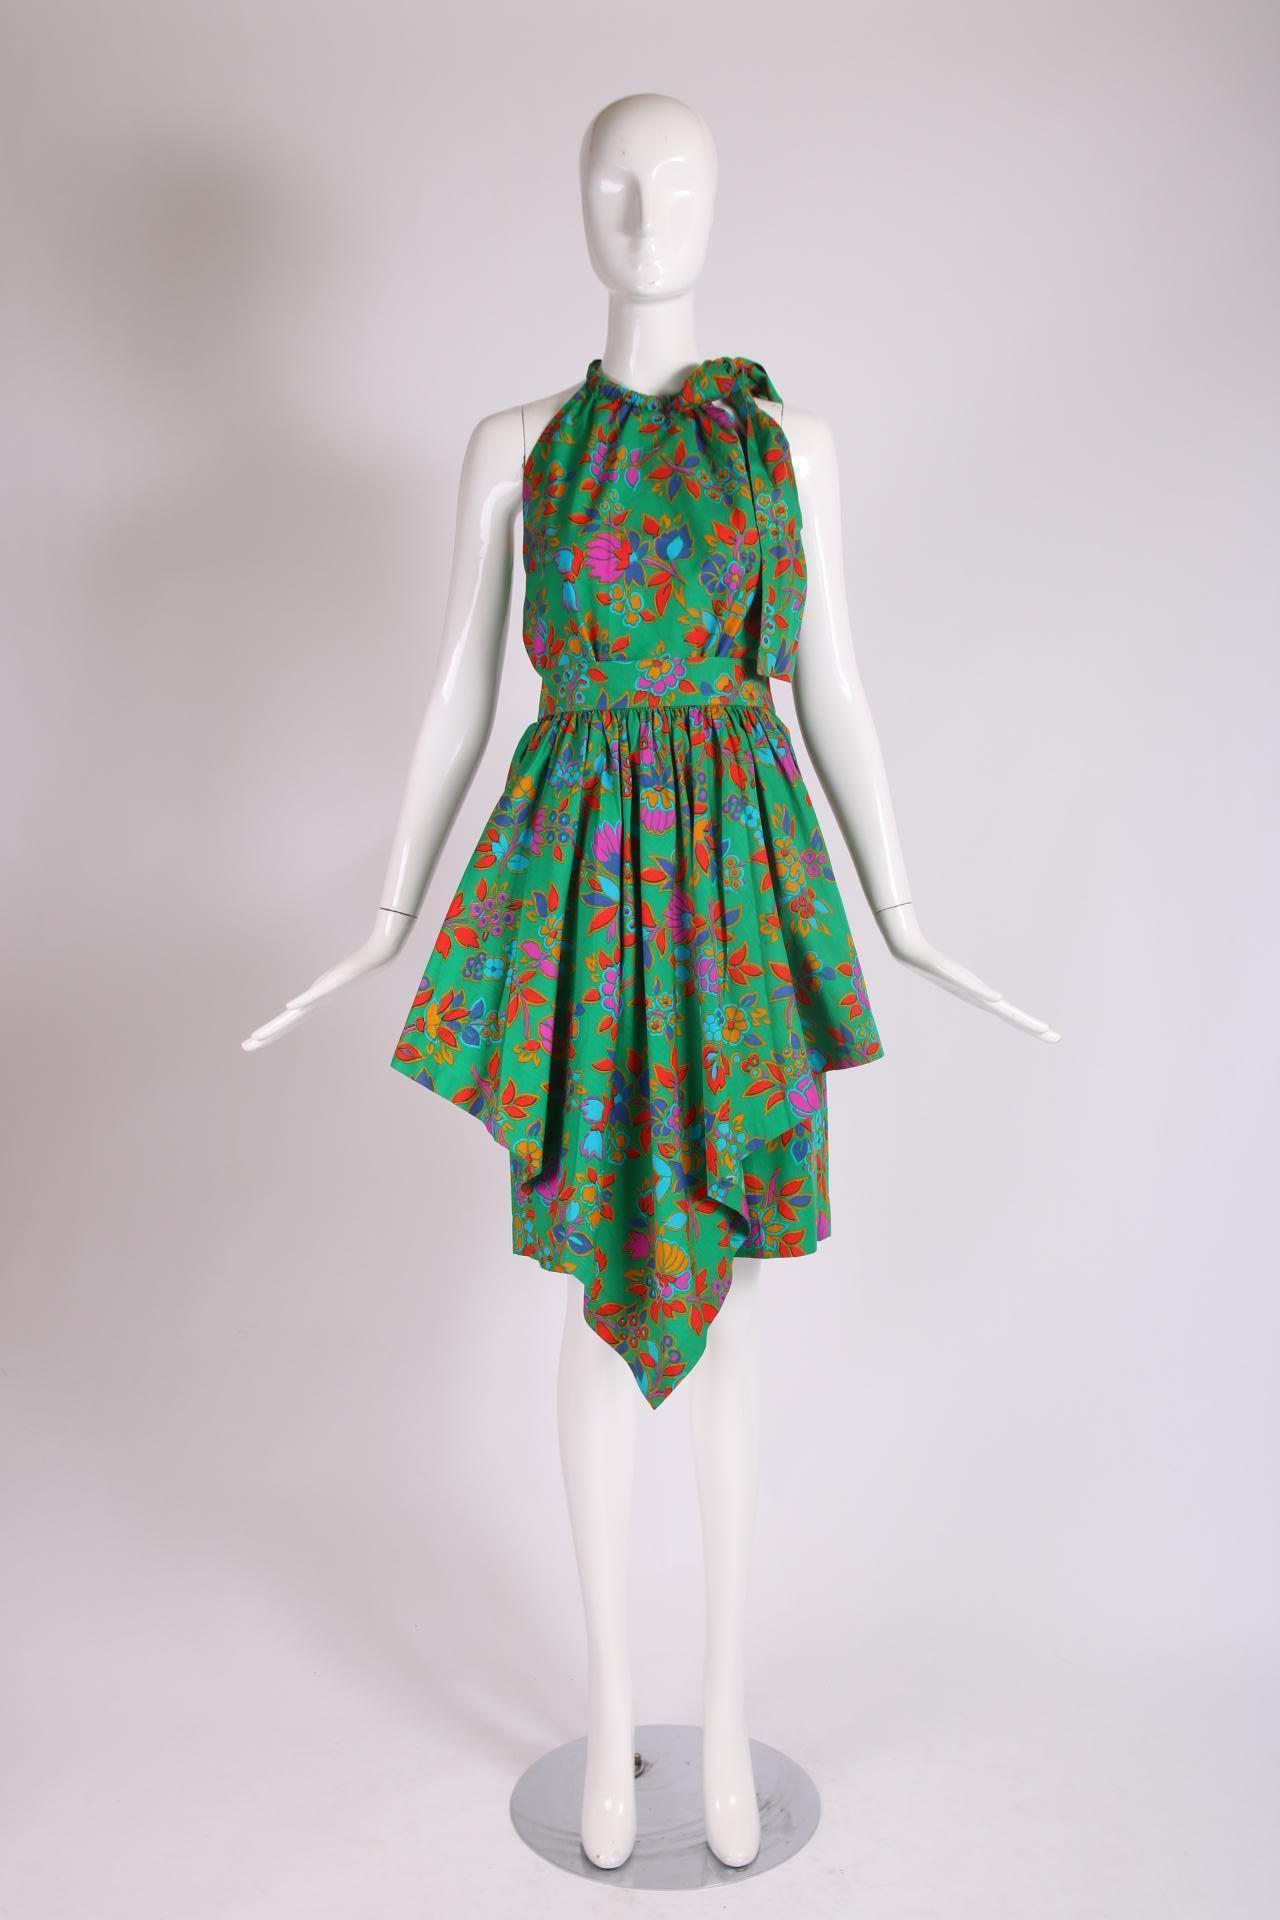 Ca. 1981 YSL 3-piece floral print ensemble comprised of a halter top which tucks into a skirt that is completely open at both sides and is worn over a pair of Bermuda style shorts. Based on its construction, when the three pieces are worn together,